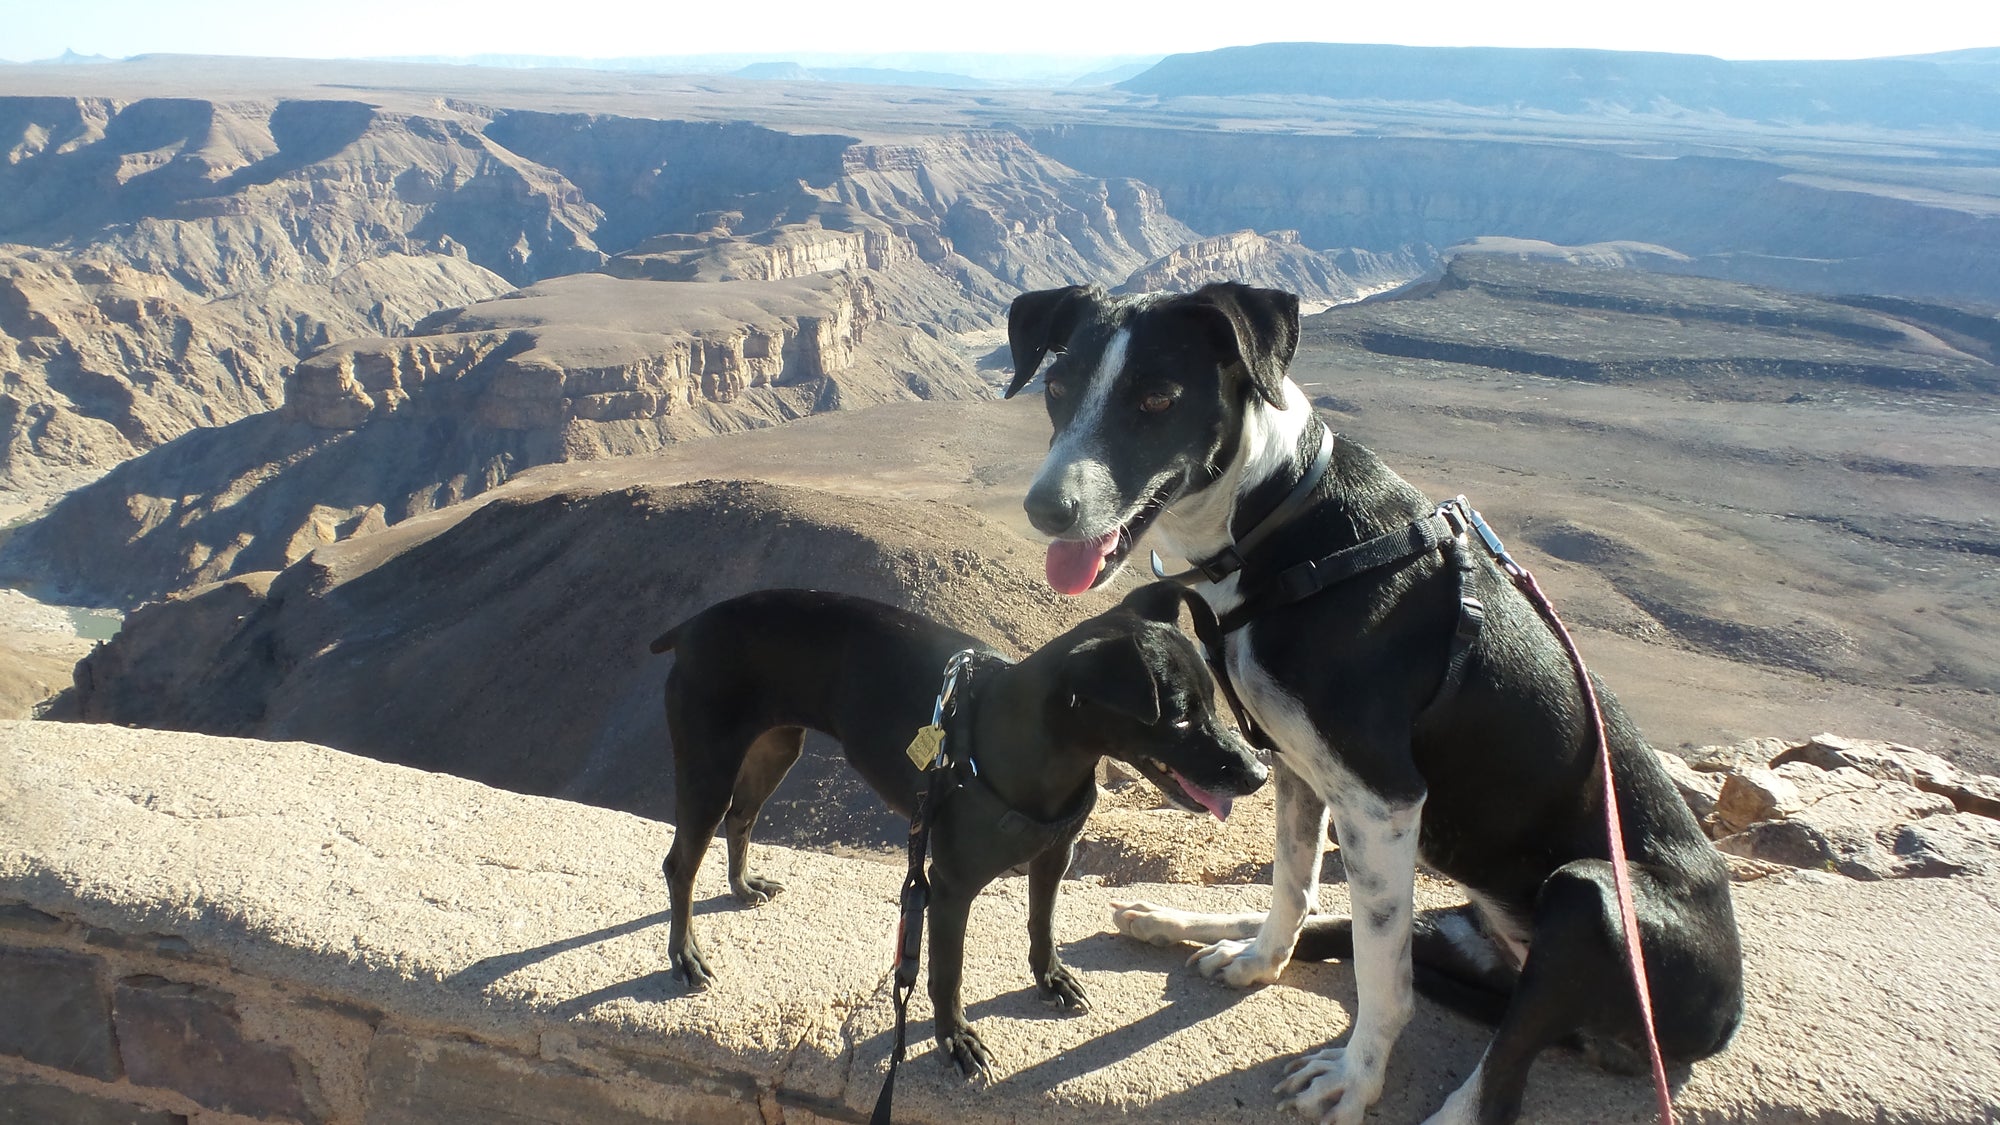 The Pack Track in Namibia enjoying the stunning views of the Fish River Canyon